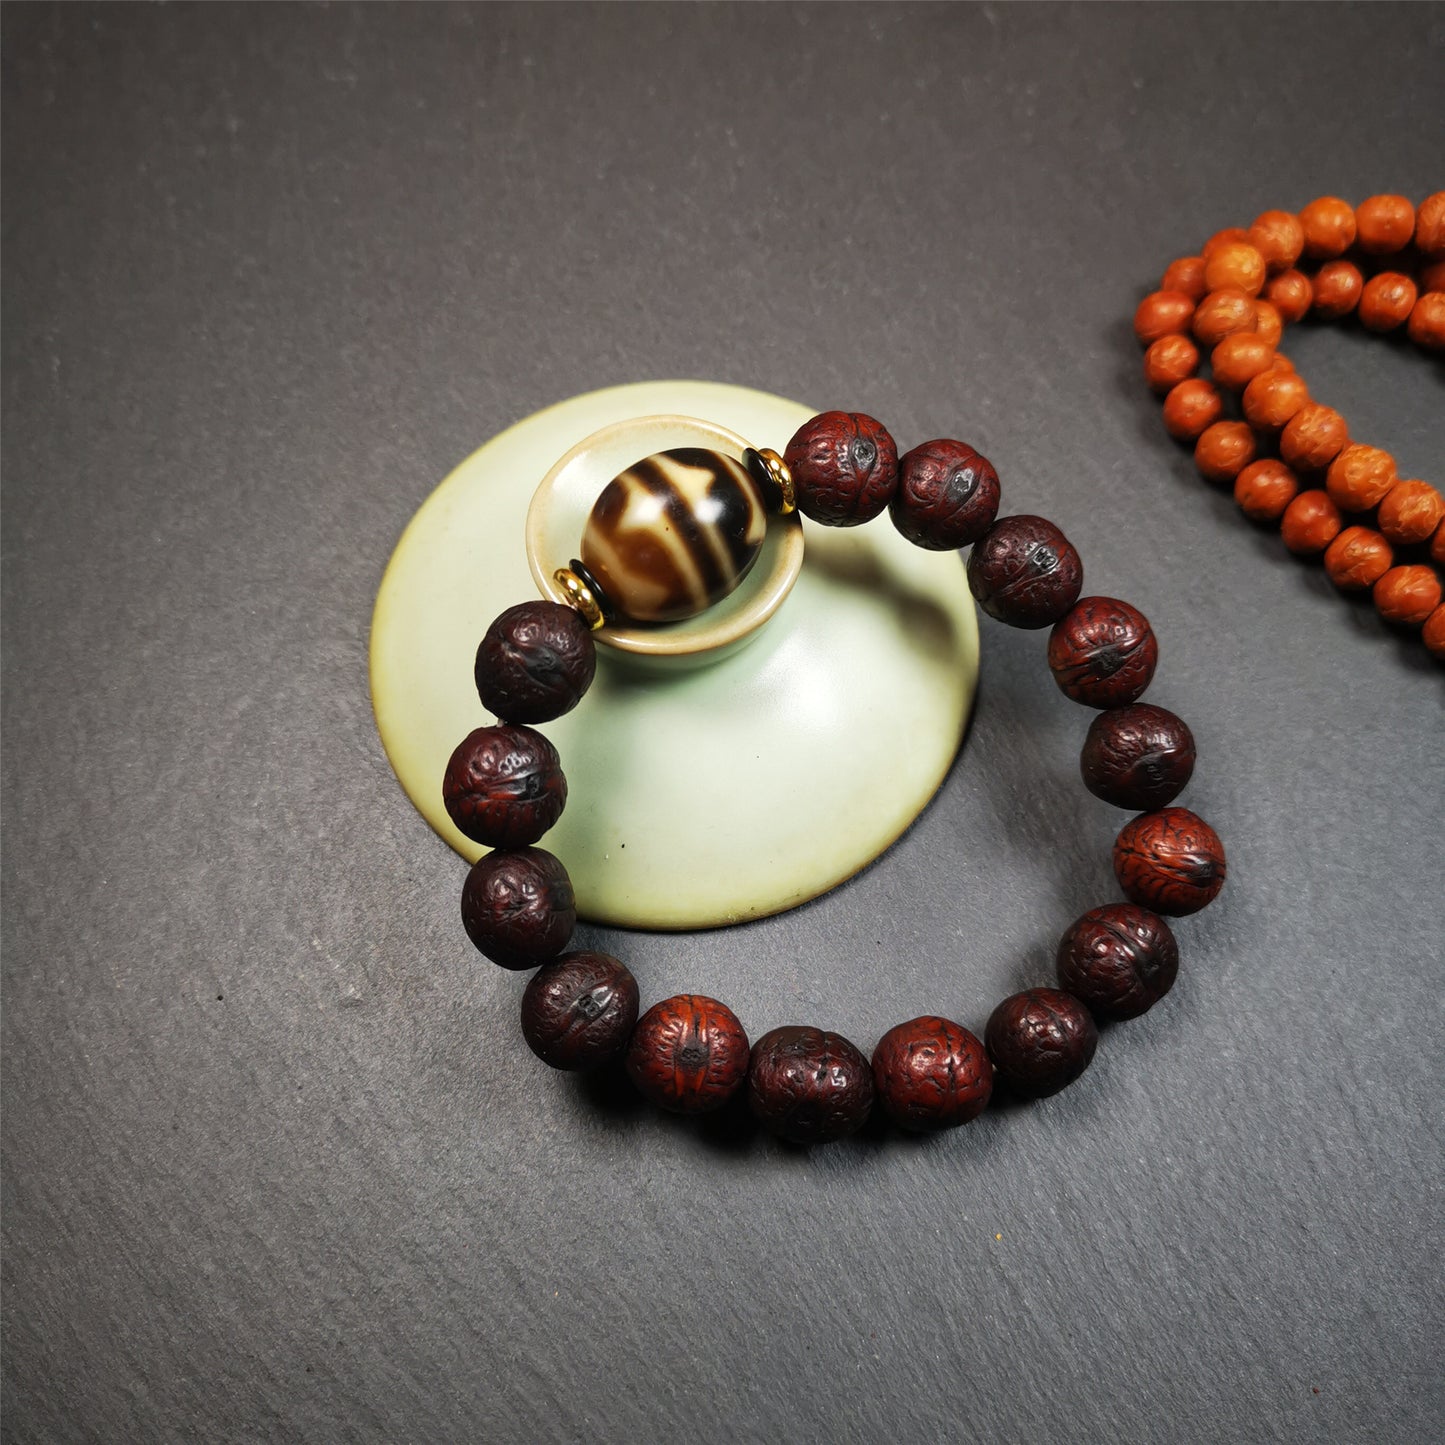 This unique Dalo Dzi bracelet combines the mysterious and unique qualities of the tiger tooth dalo dzi and 15 old bodhi seed beads,giving it a distinct feel.  It is brown in color and has a circumference of approximately 7 inches, suitable for most wrist sizes. 